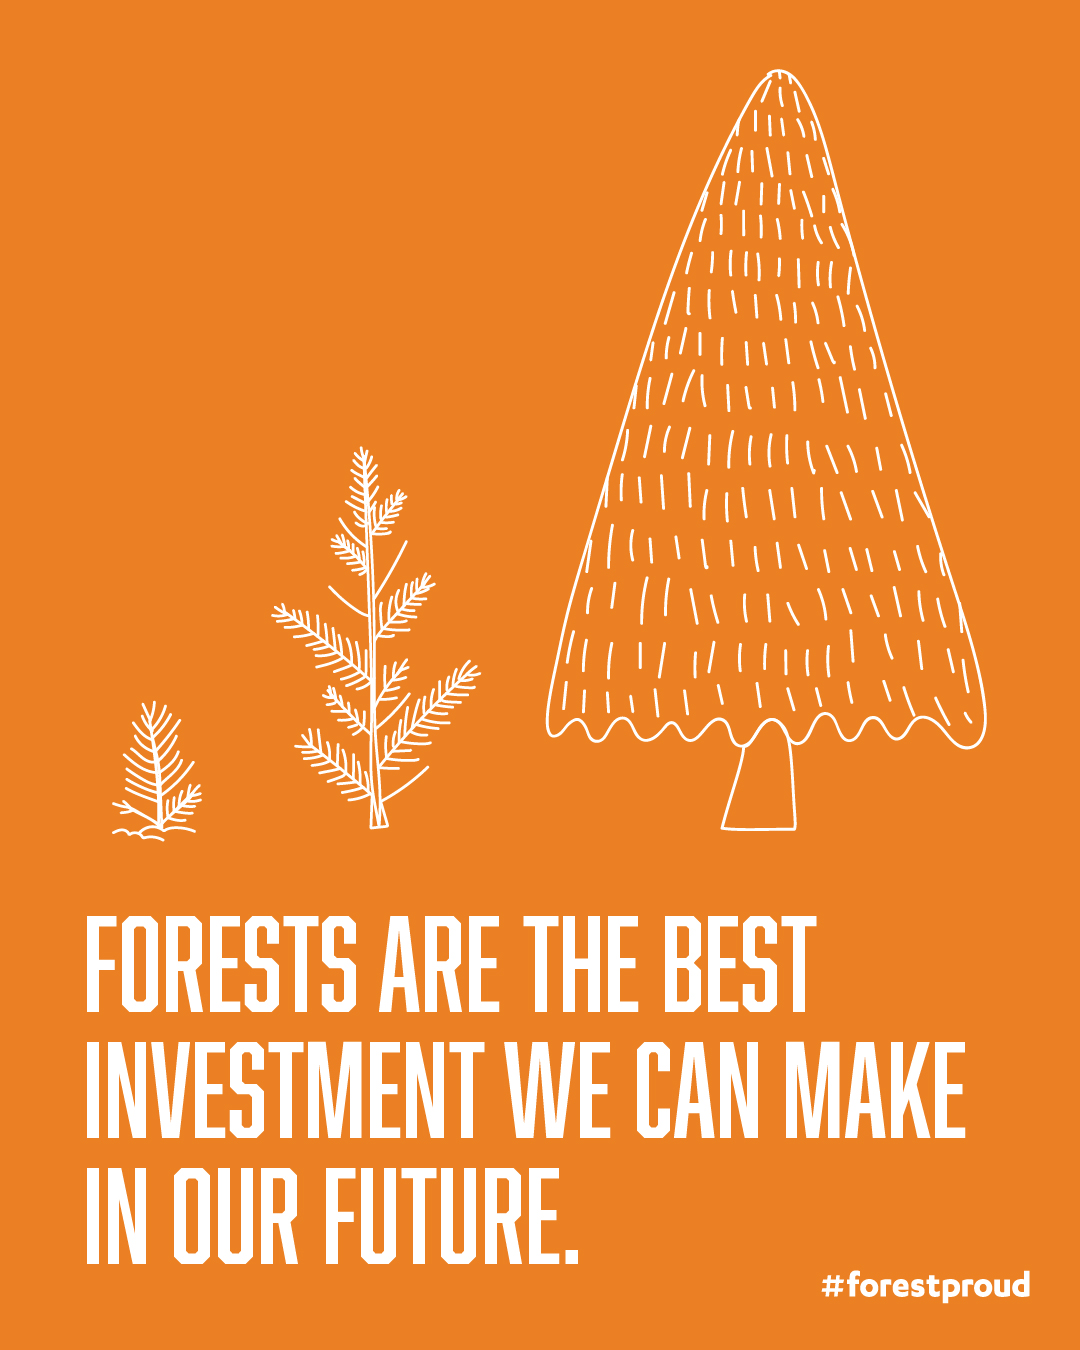 Forests are the best investment we can make (2 types of trees!)